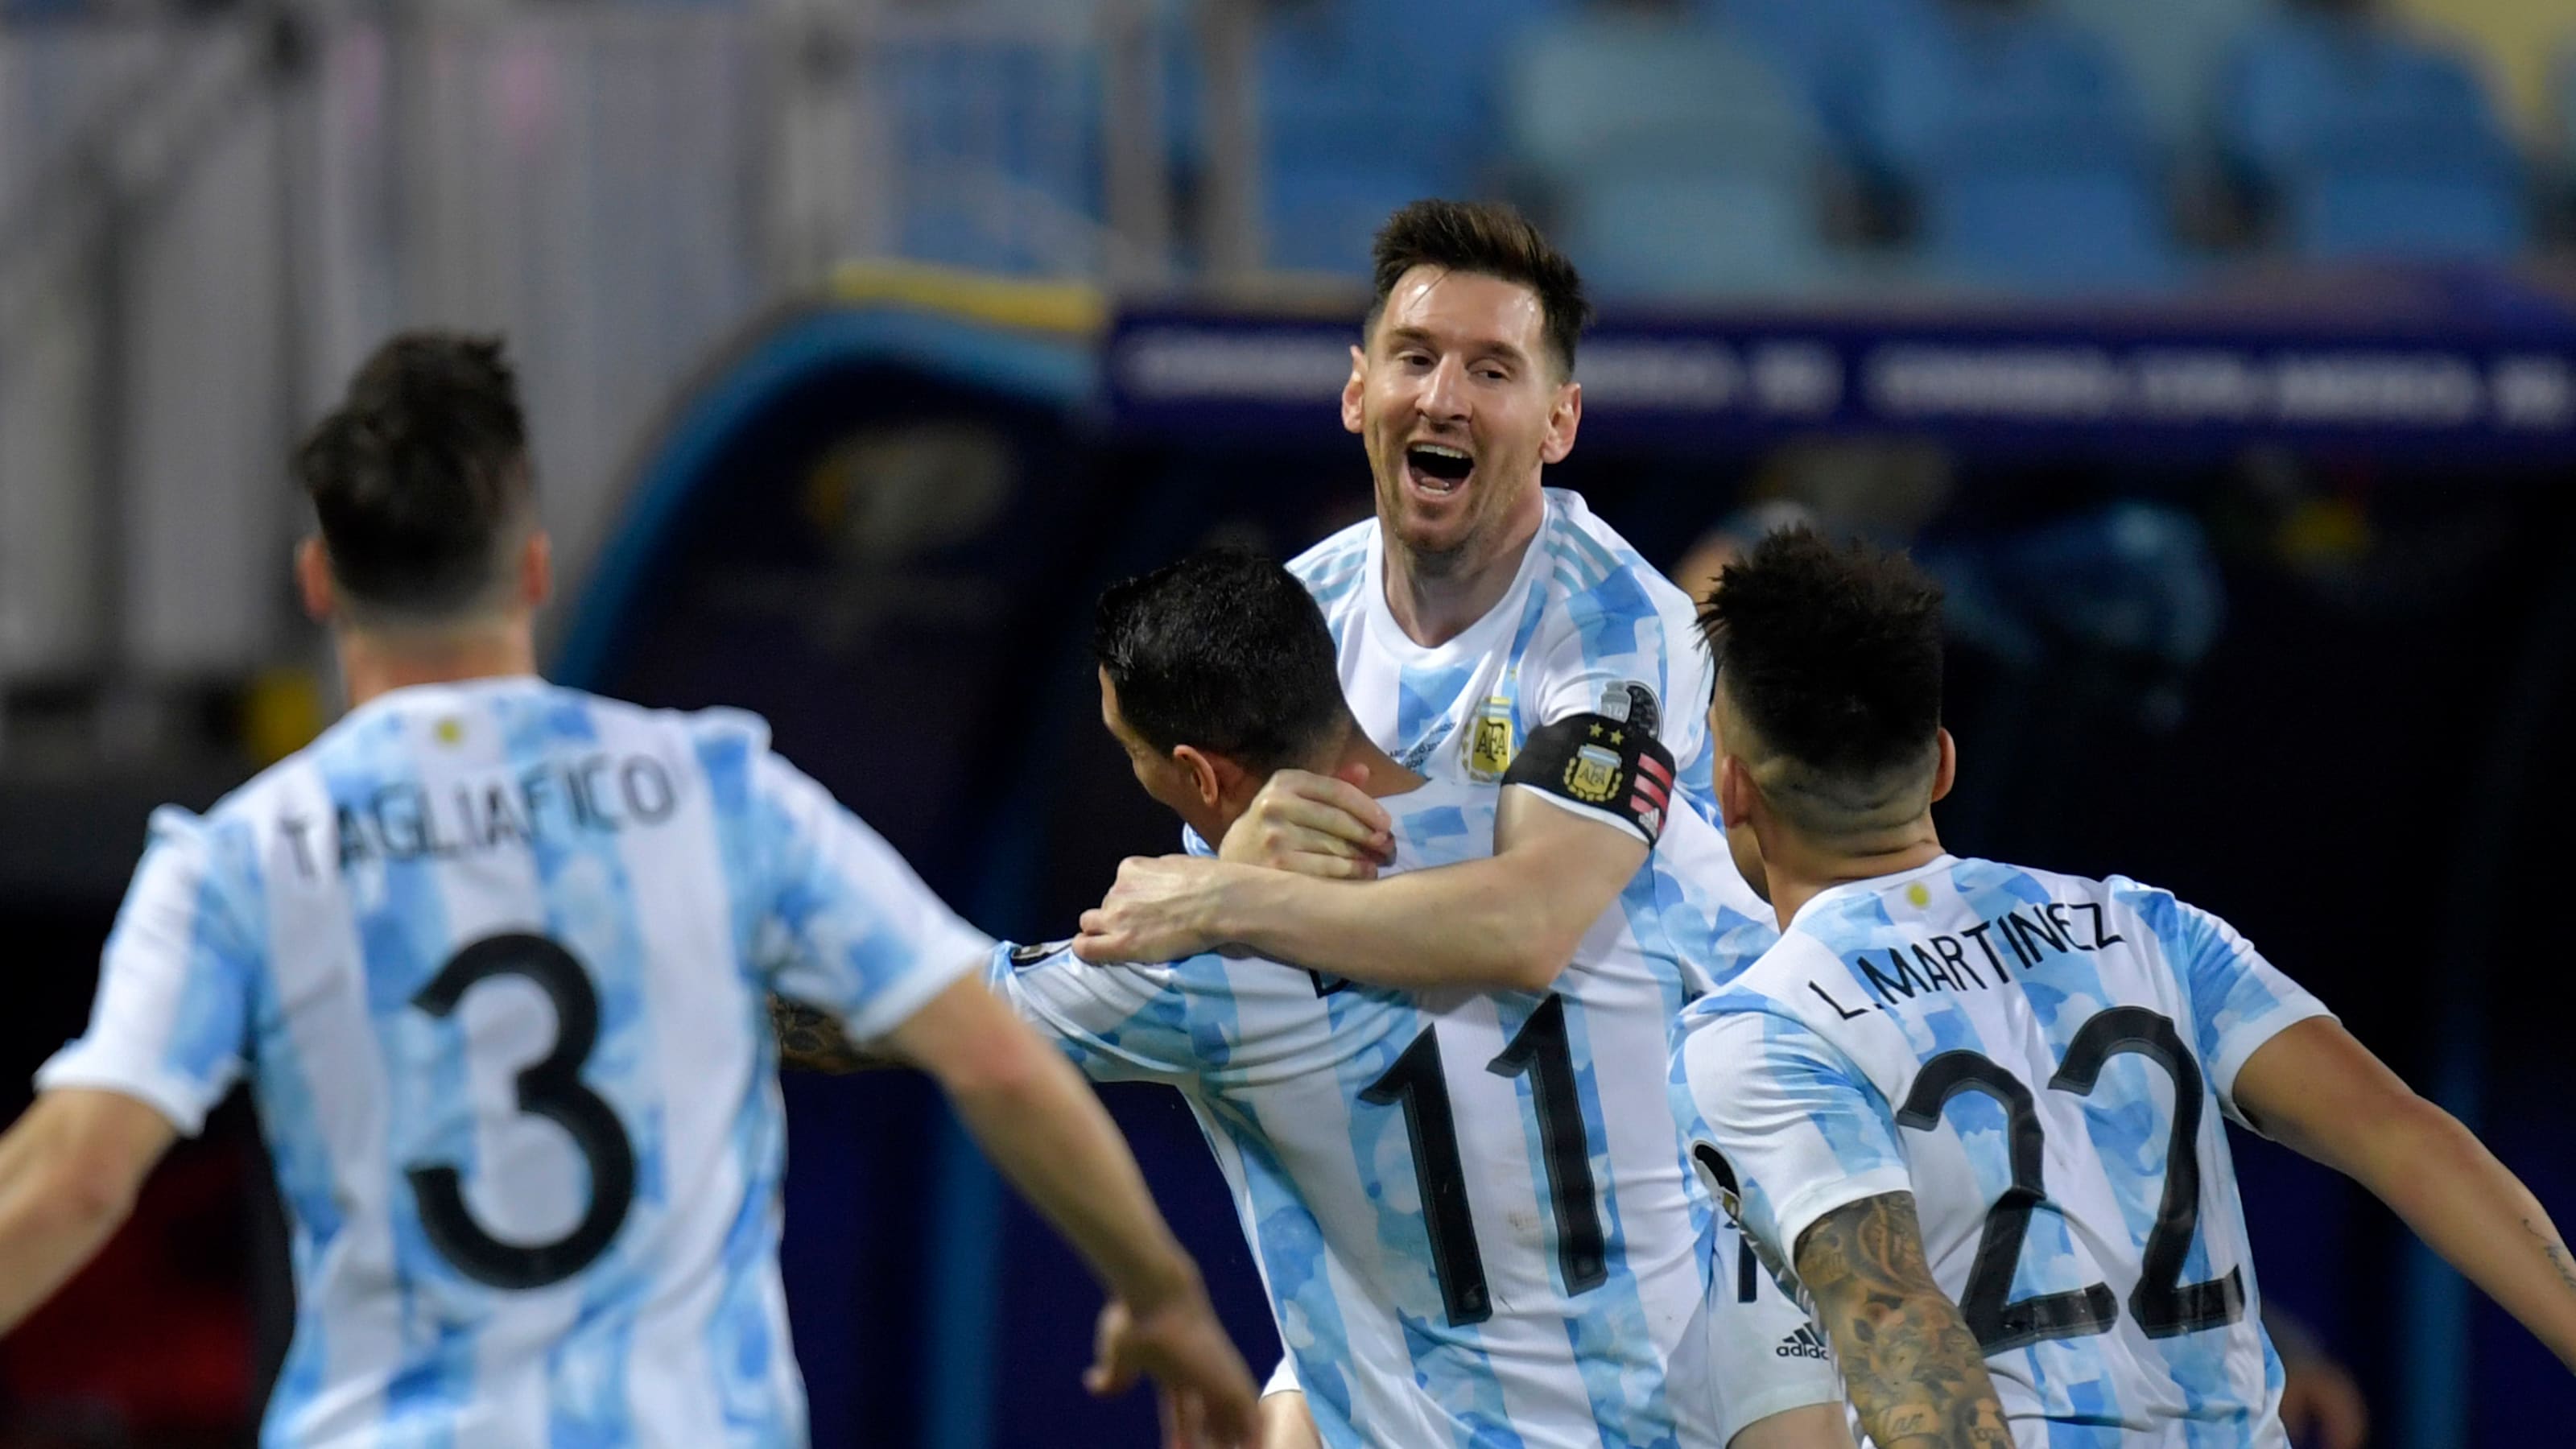 Copa America 2021 Semi Finals: Get Schedule, Fixtures, Teams And Watch Telecast And Live Streaming In India